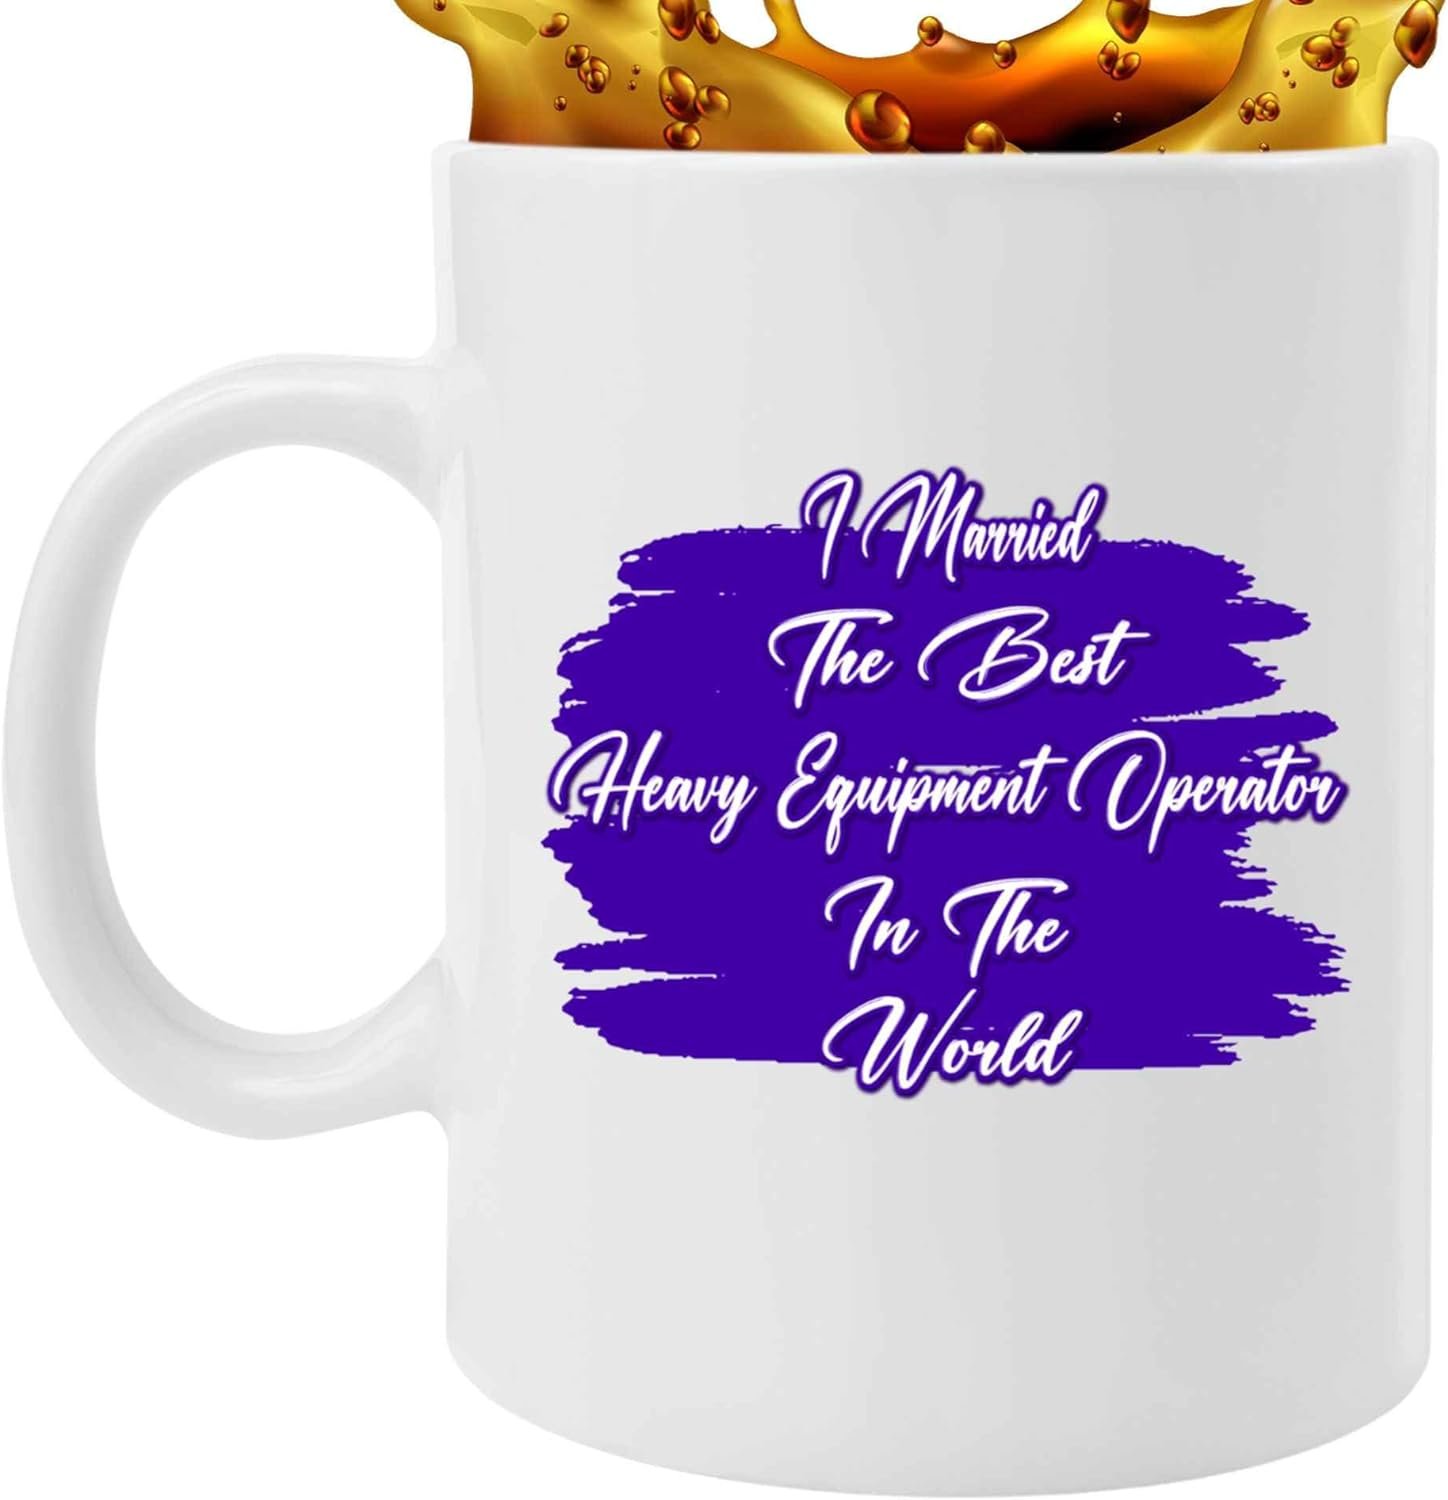 Funny Quote on Ceramic Coffee Mug – Heavy Equipment Operator Gift Review